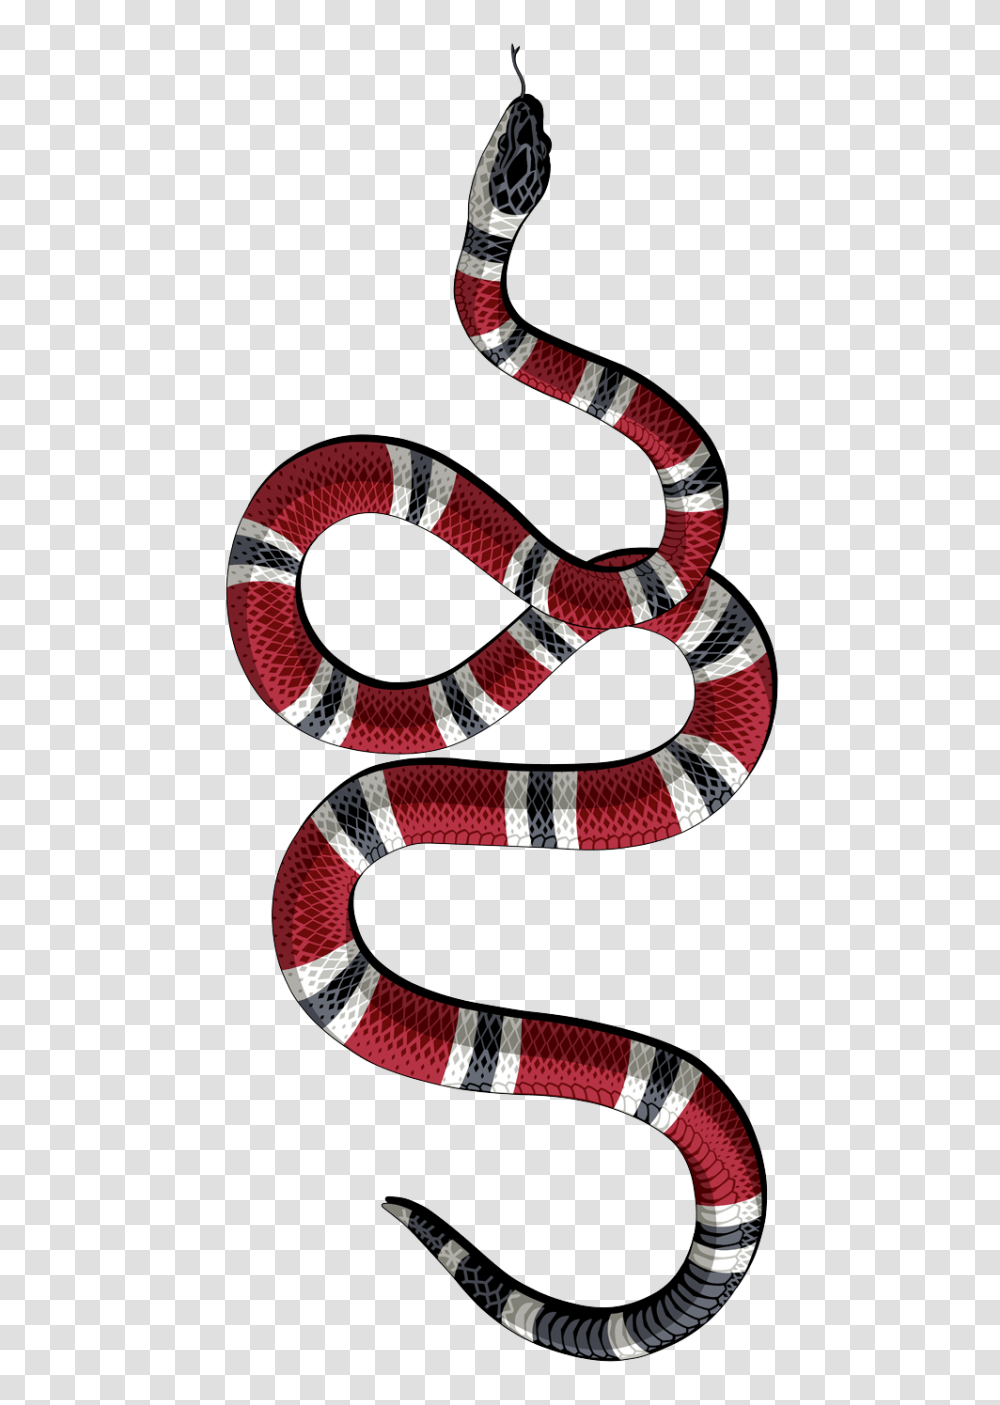 Decal Kingsnakes Gucci Sticker Serpent On Car King